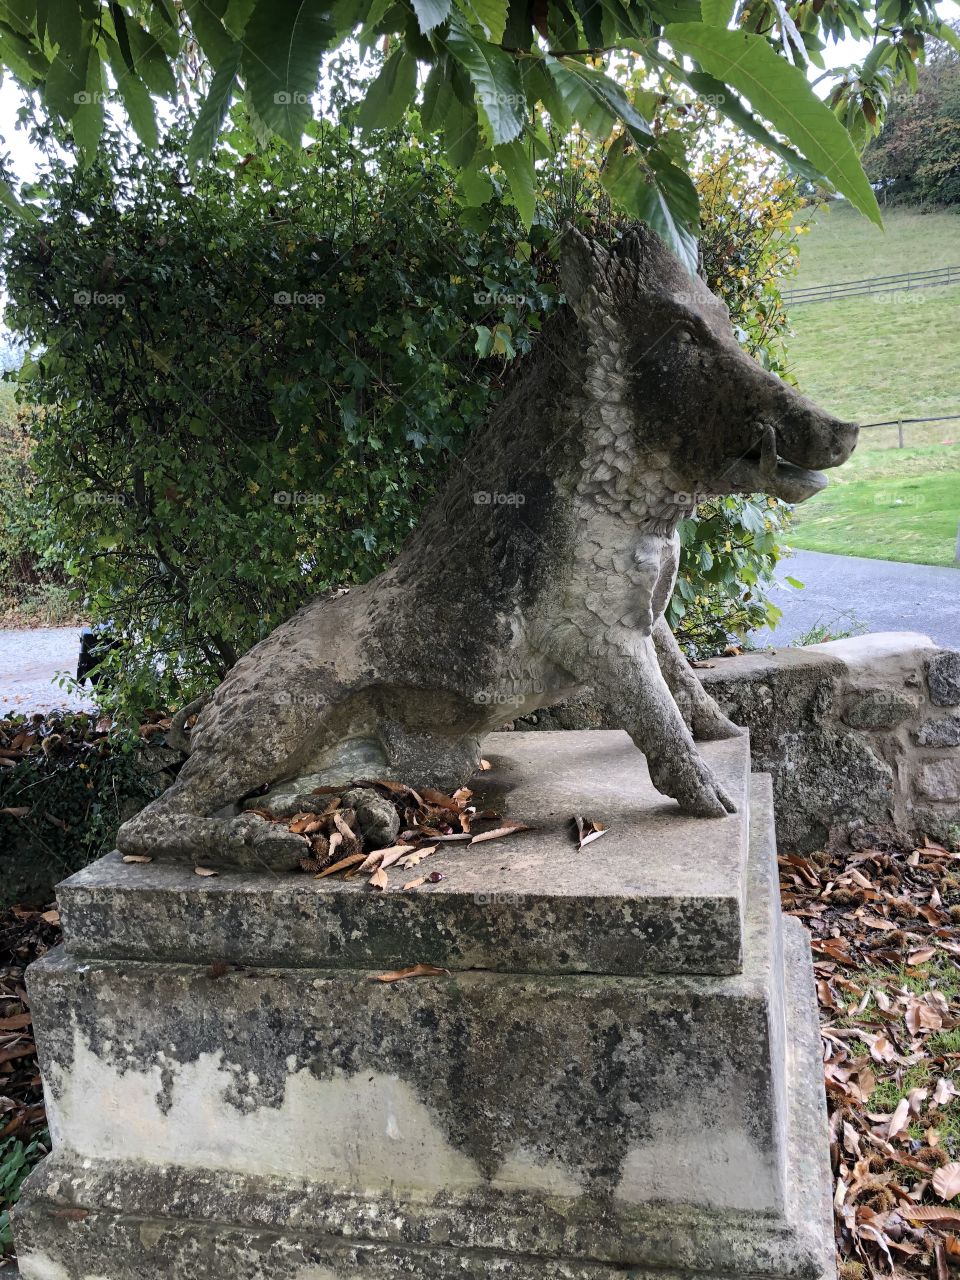 I rather like this statue of an animal, but l don’t have a clue, but the one thing we do know is that it’s Autumn because this creature is sitting under a bed of Autumn leaves.